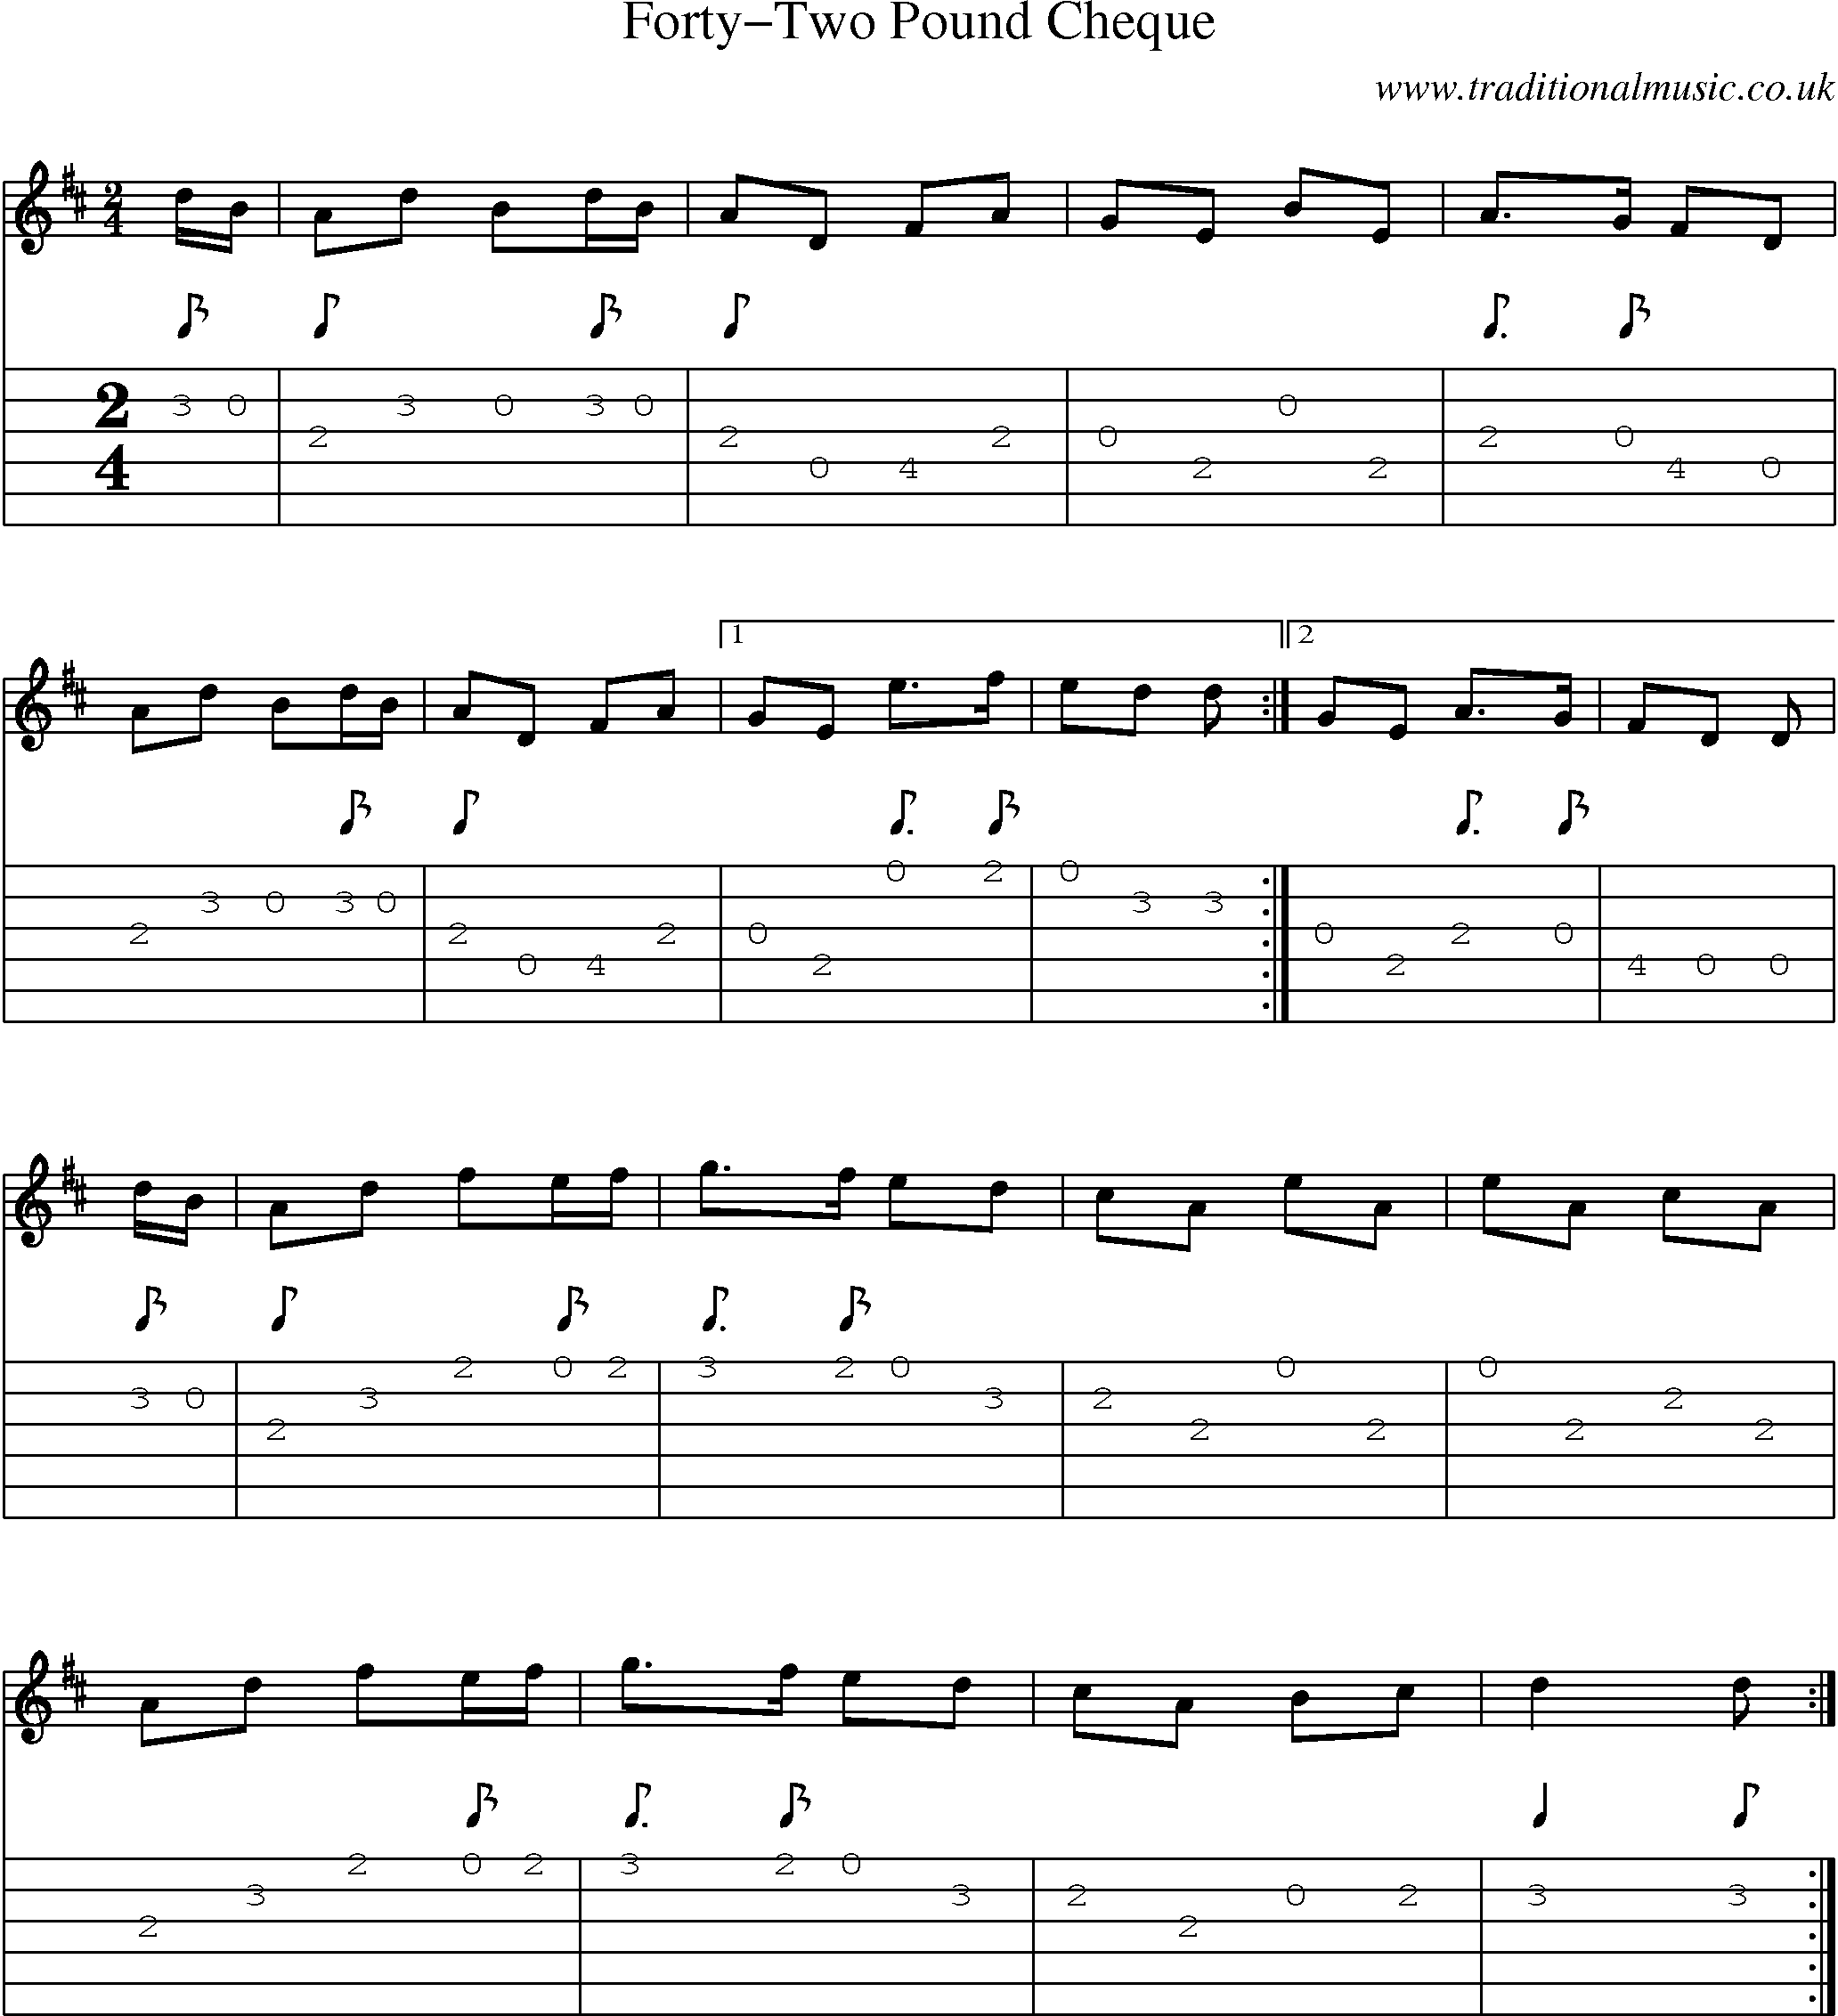 Music Score and Guitar Tabs for Fortytwo Pound Cheque